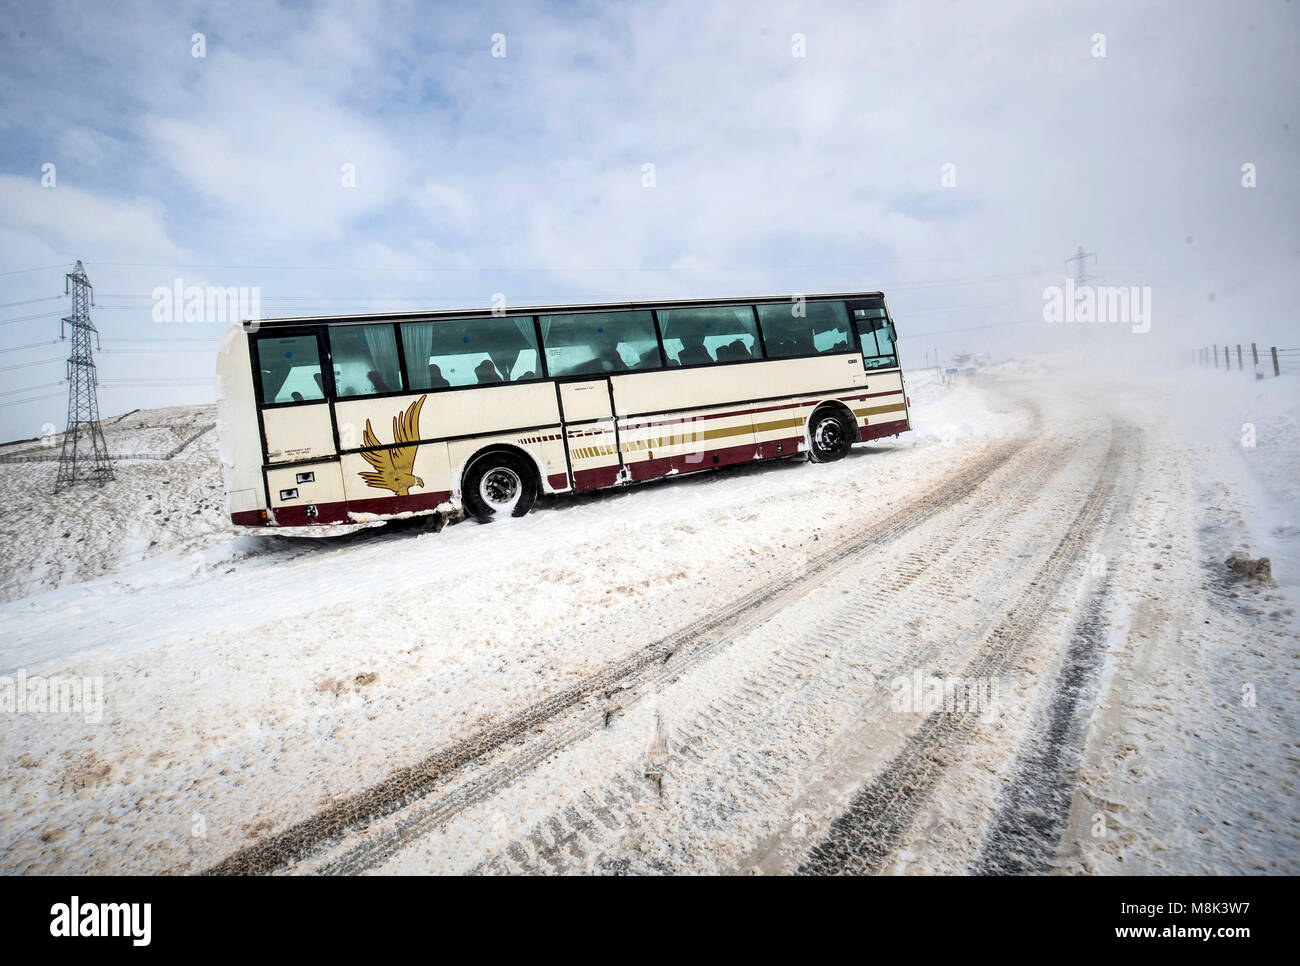 A stranded coach on Blackstone Edge near Littleborough in Greater Manchester where snow fell overnight as the wintry snap dubbed the 'mini beast from the east' keeps its grip on the UK. Stock Photo